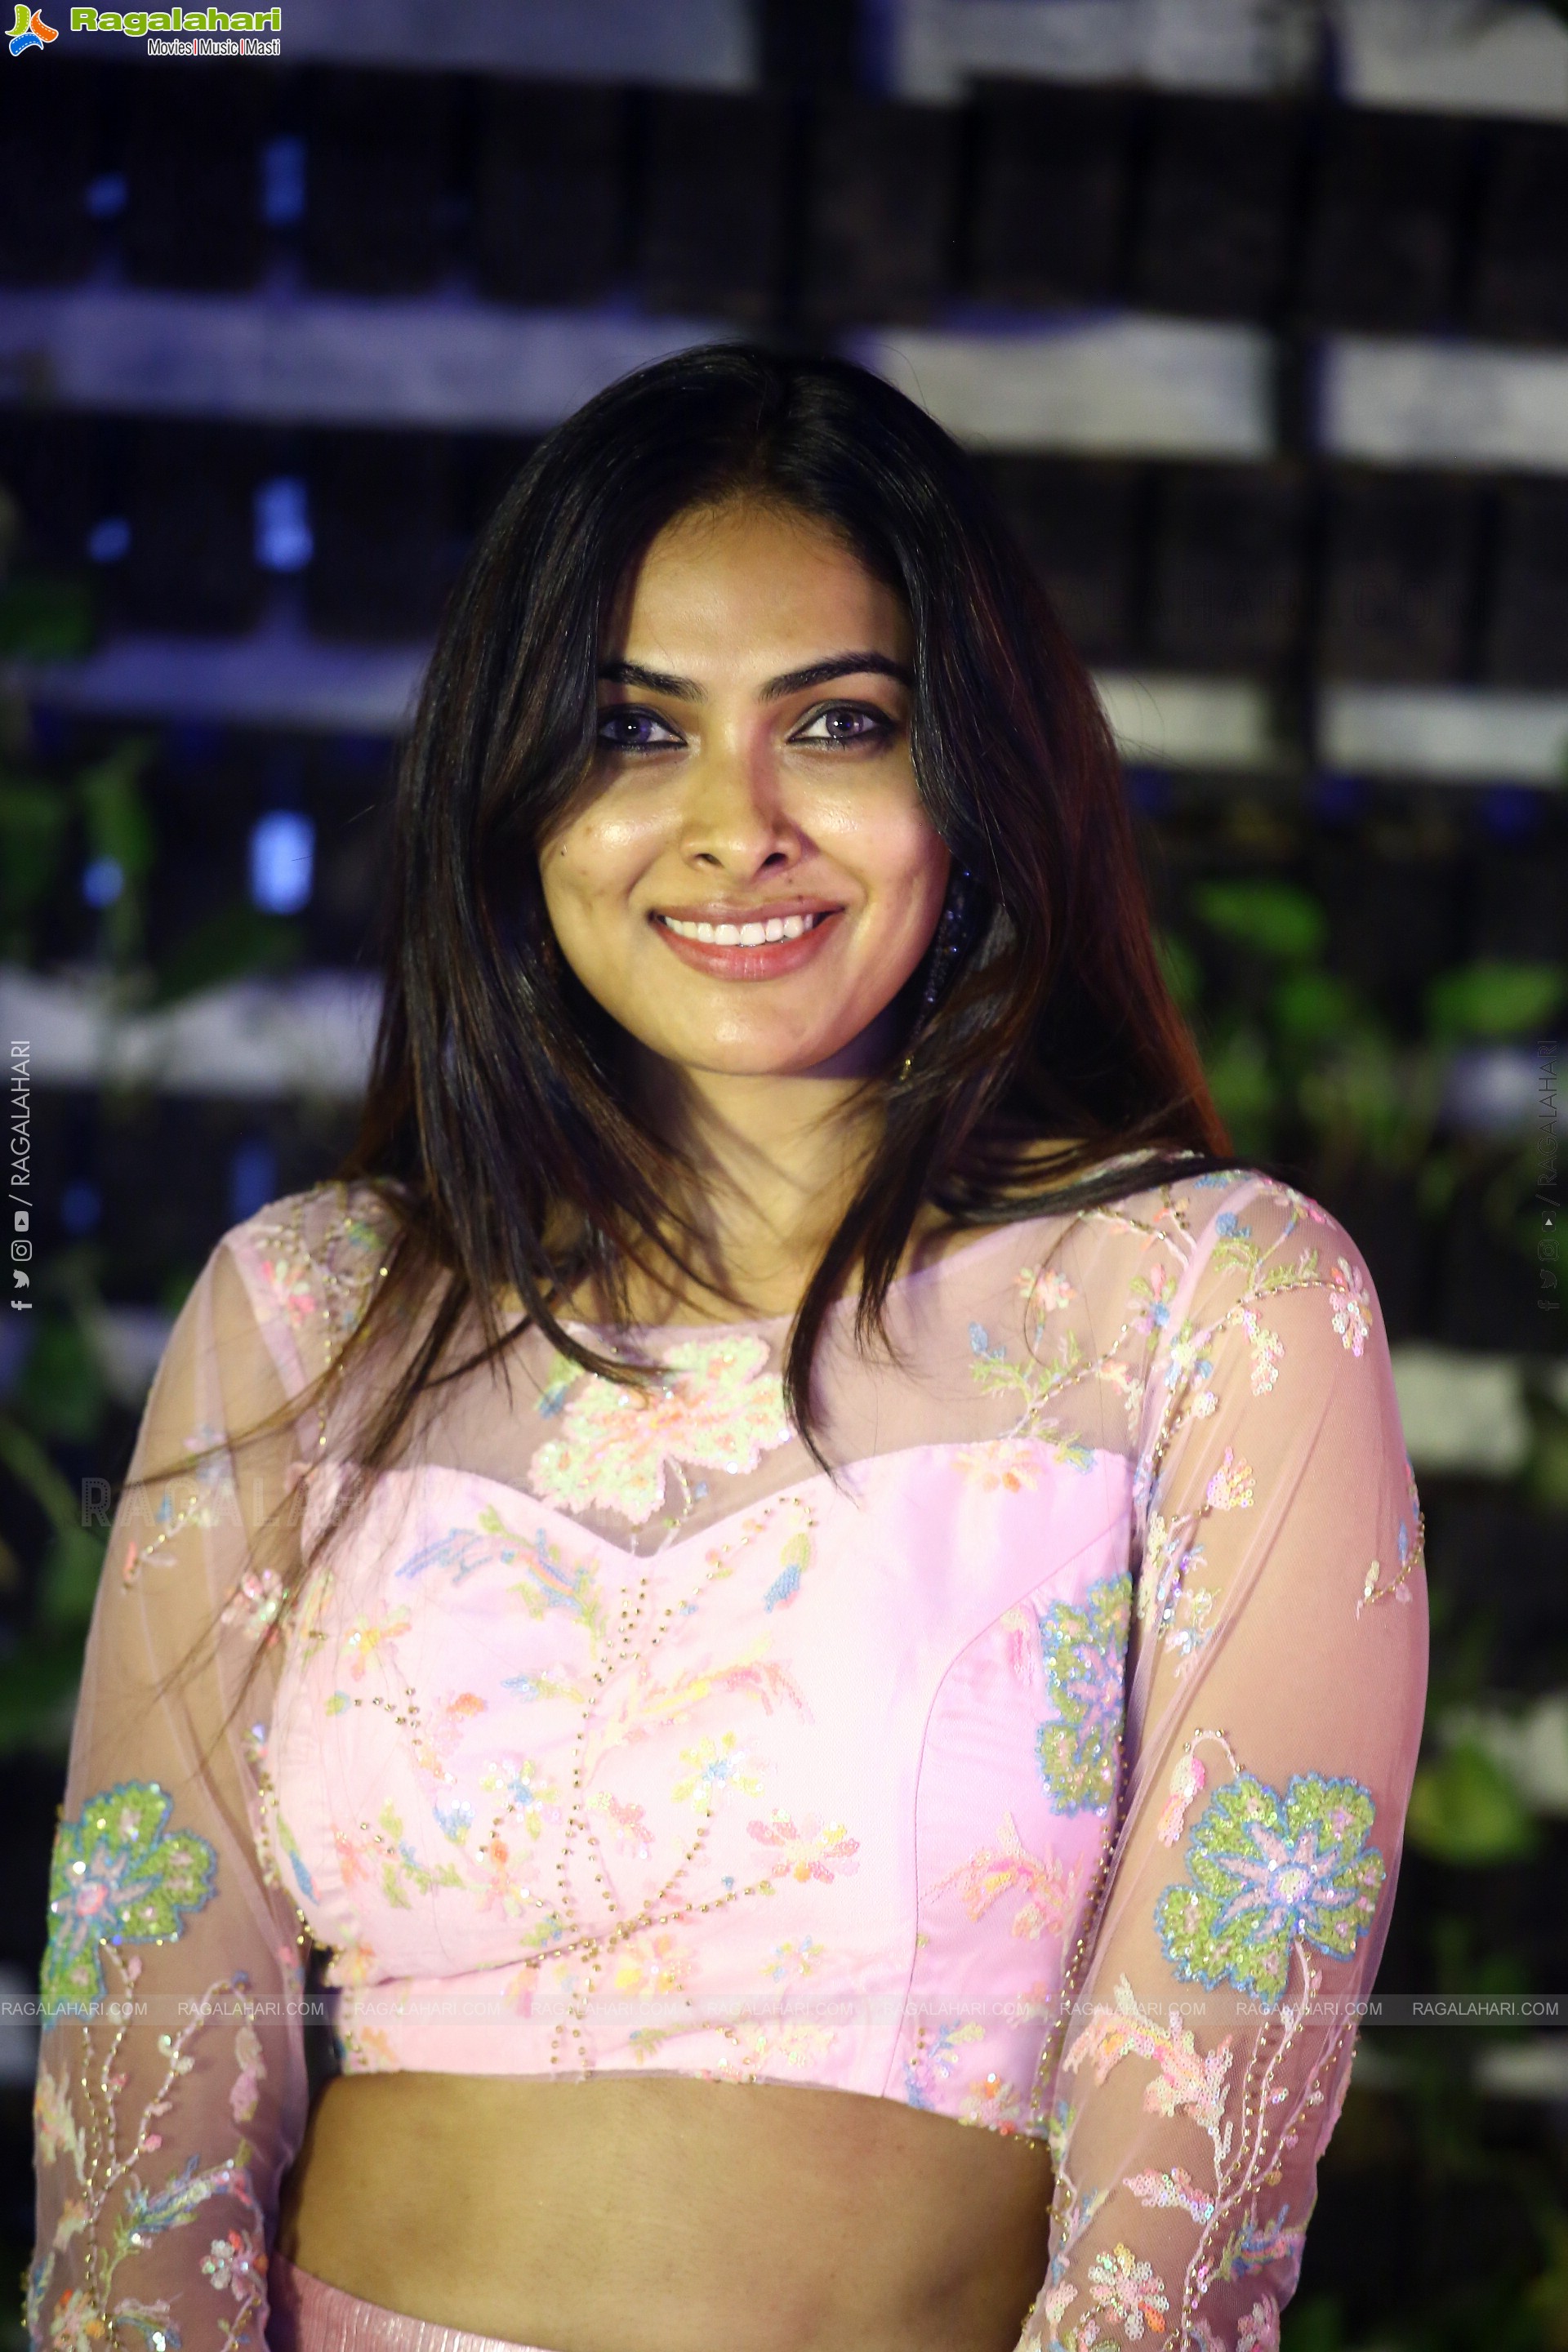 Divi Vadthya at Maa Neella Tank Pre-Release Event, HD Photo Gallery